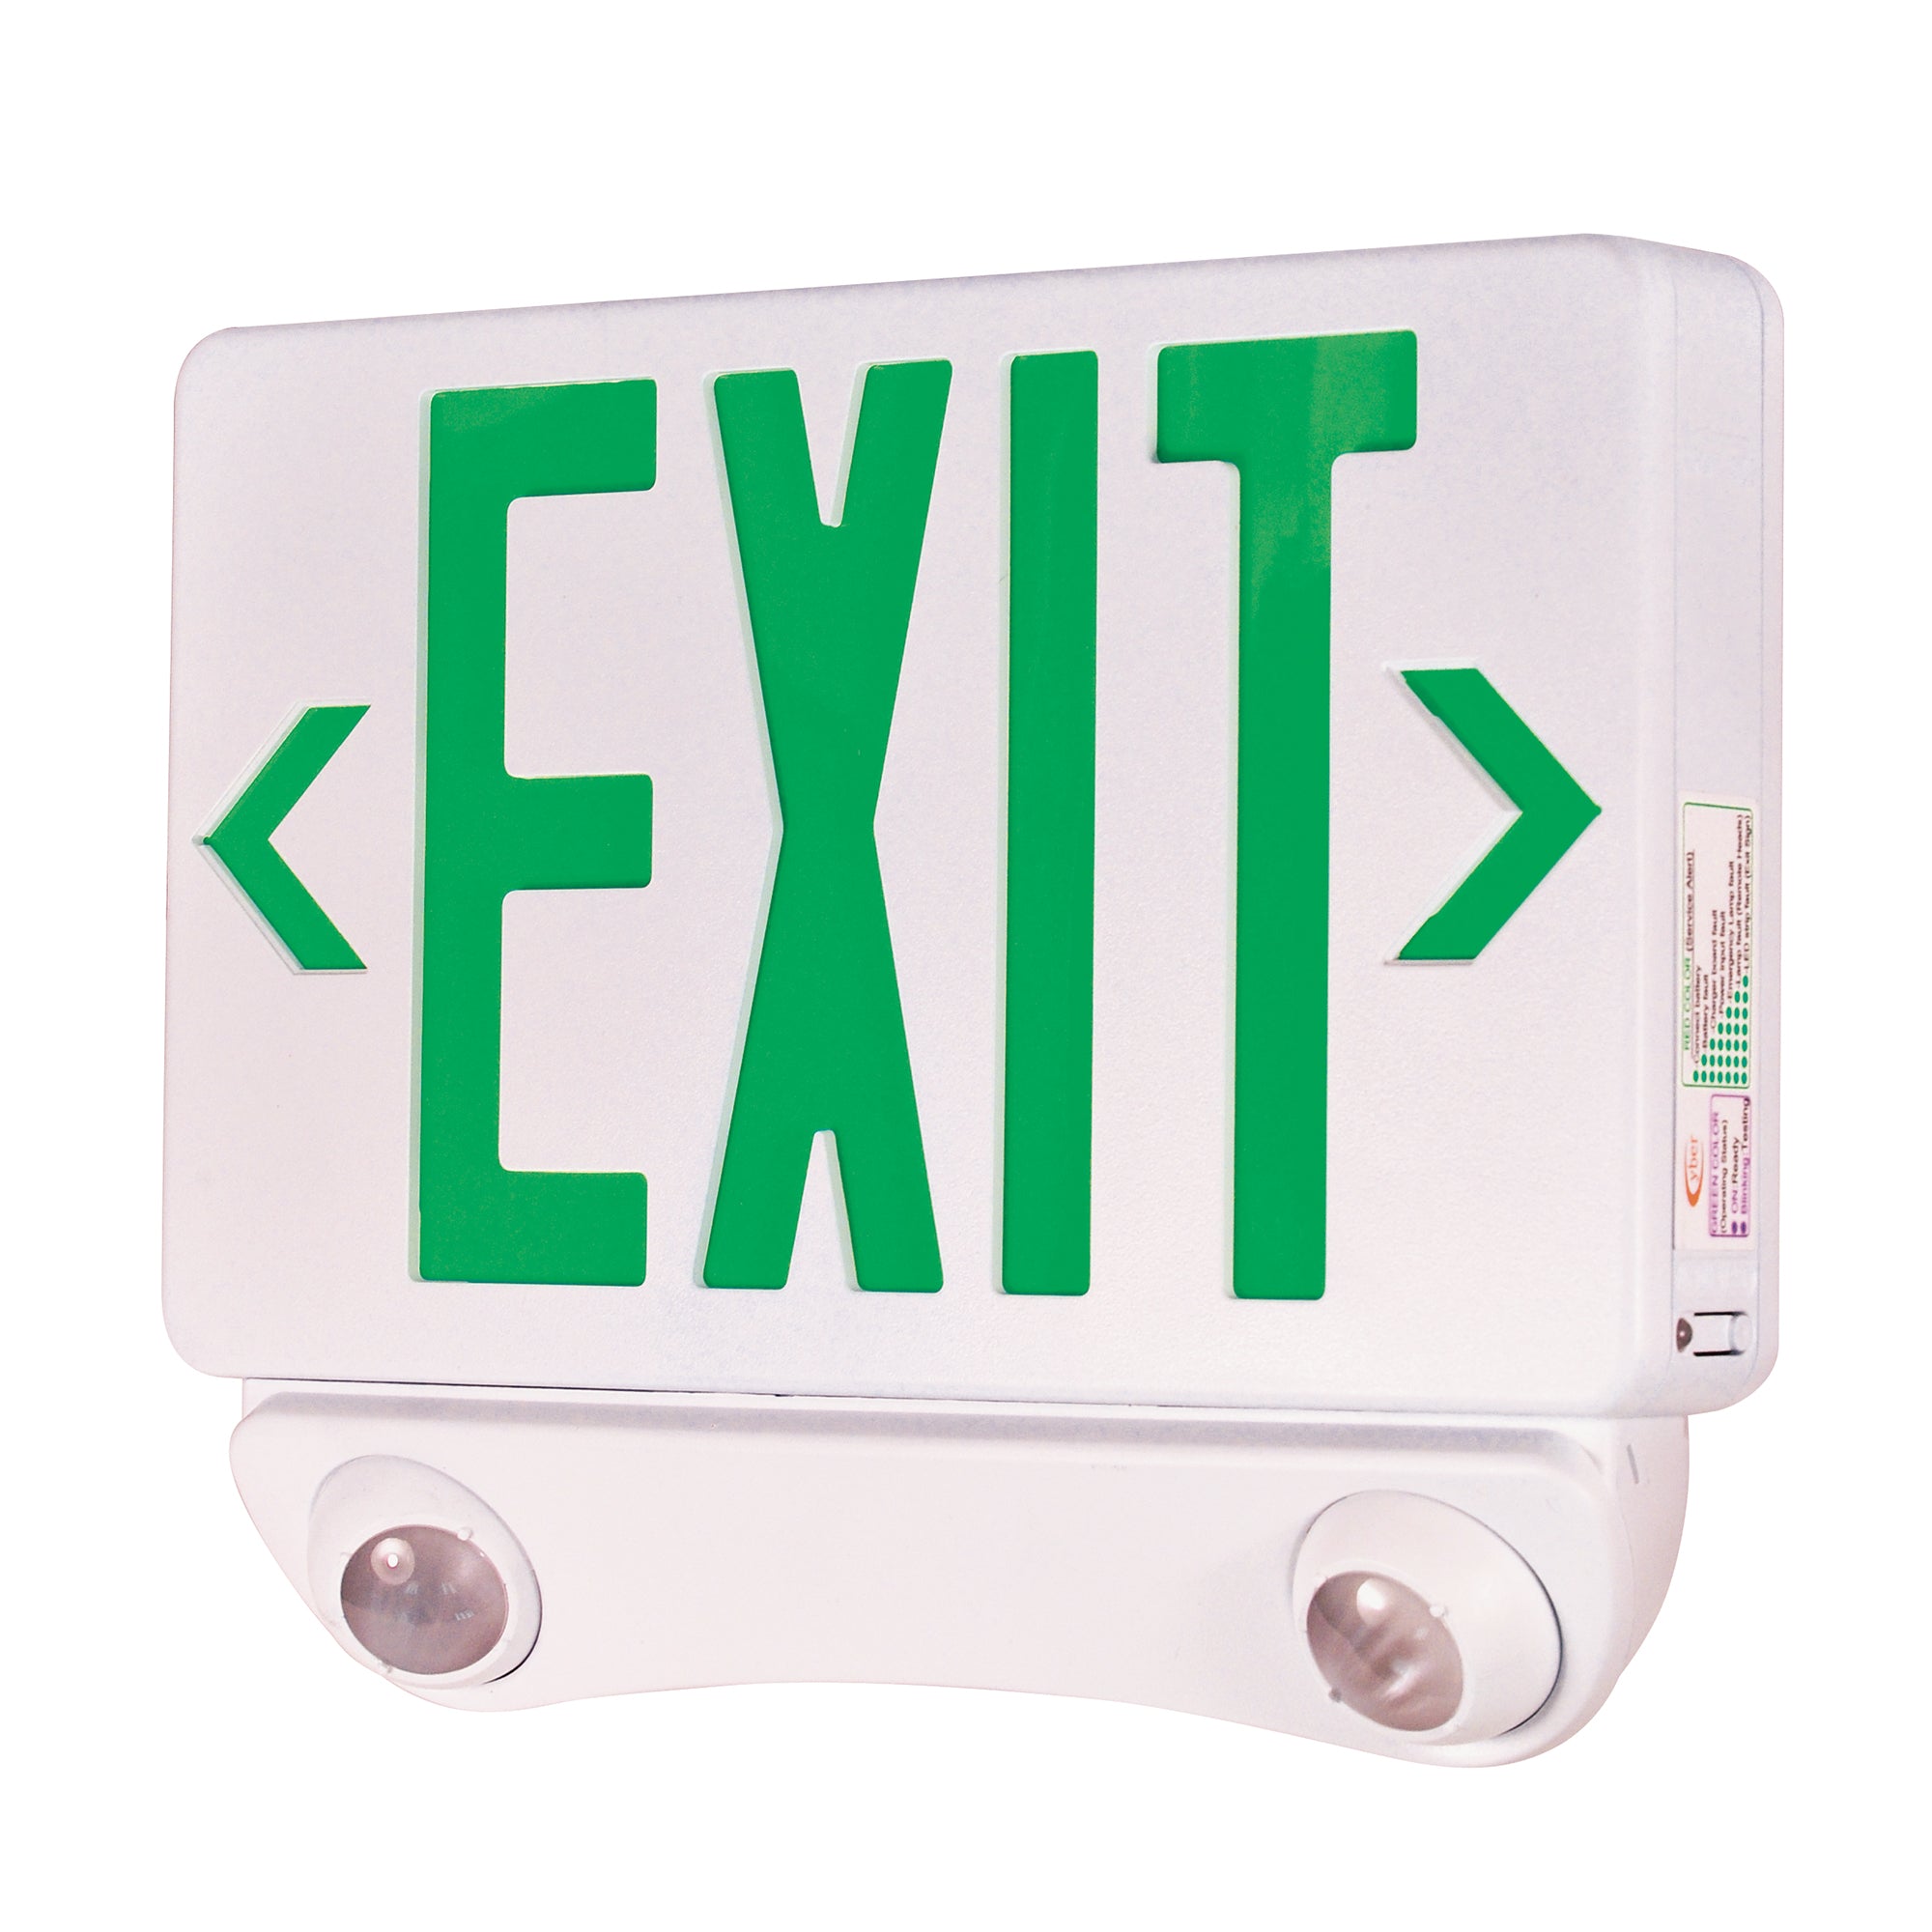 Nora Lighting NEX-730-LED/G LED Exit and Emergency Combination With Adjustable Heads, Green Letters / White Housing - White